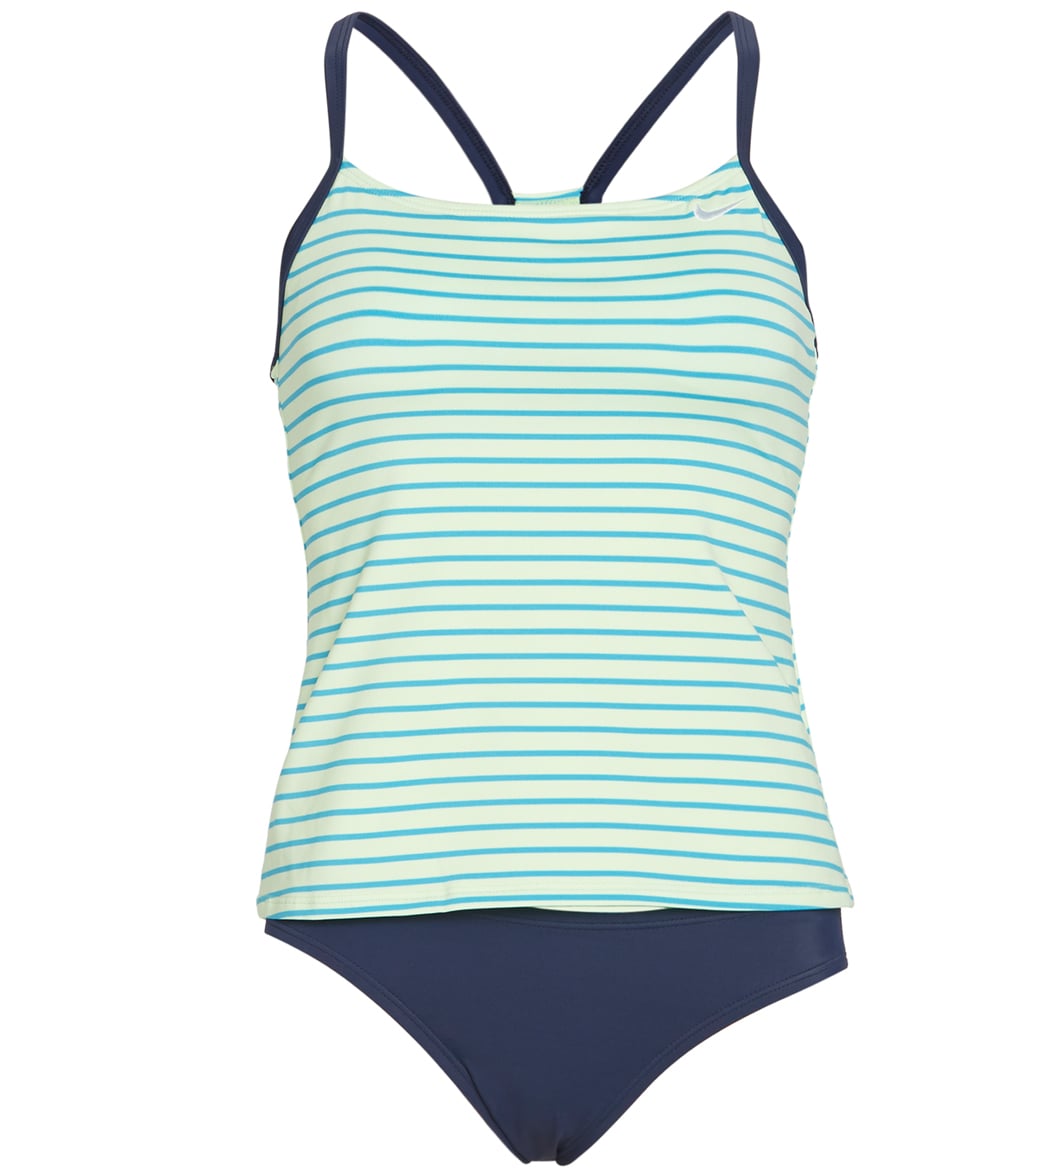 nike two piece outfit women's